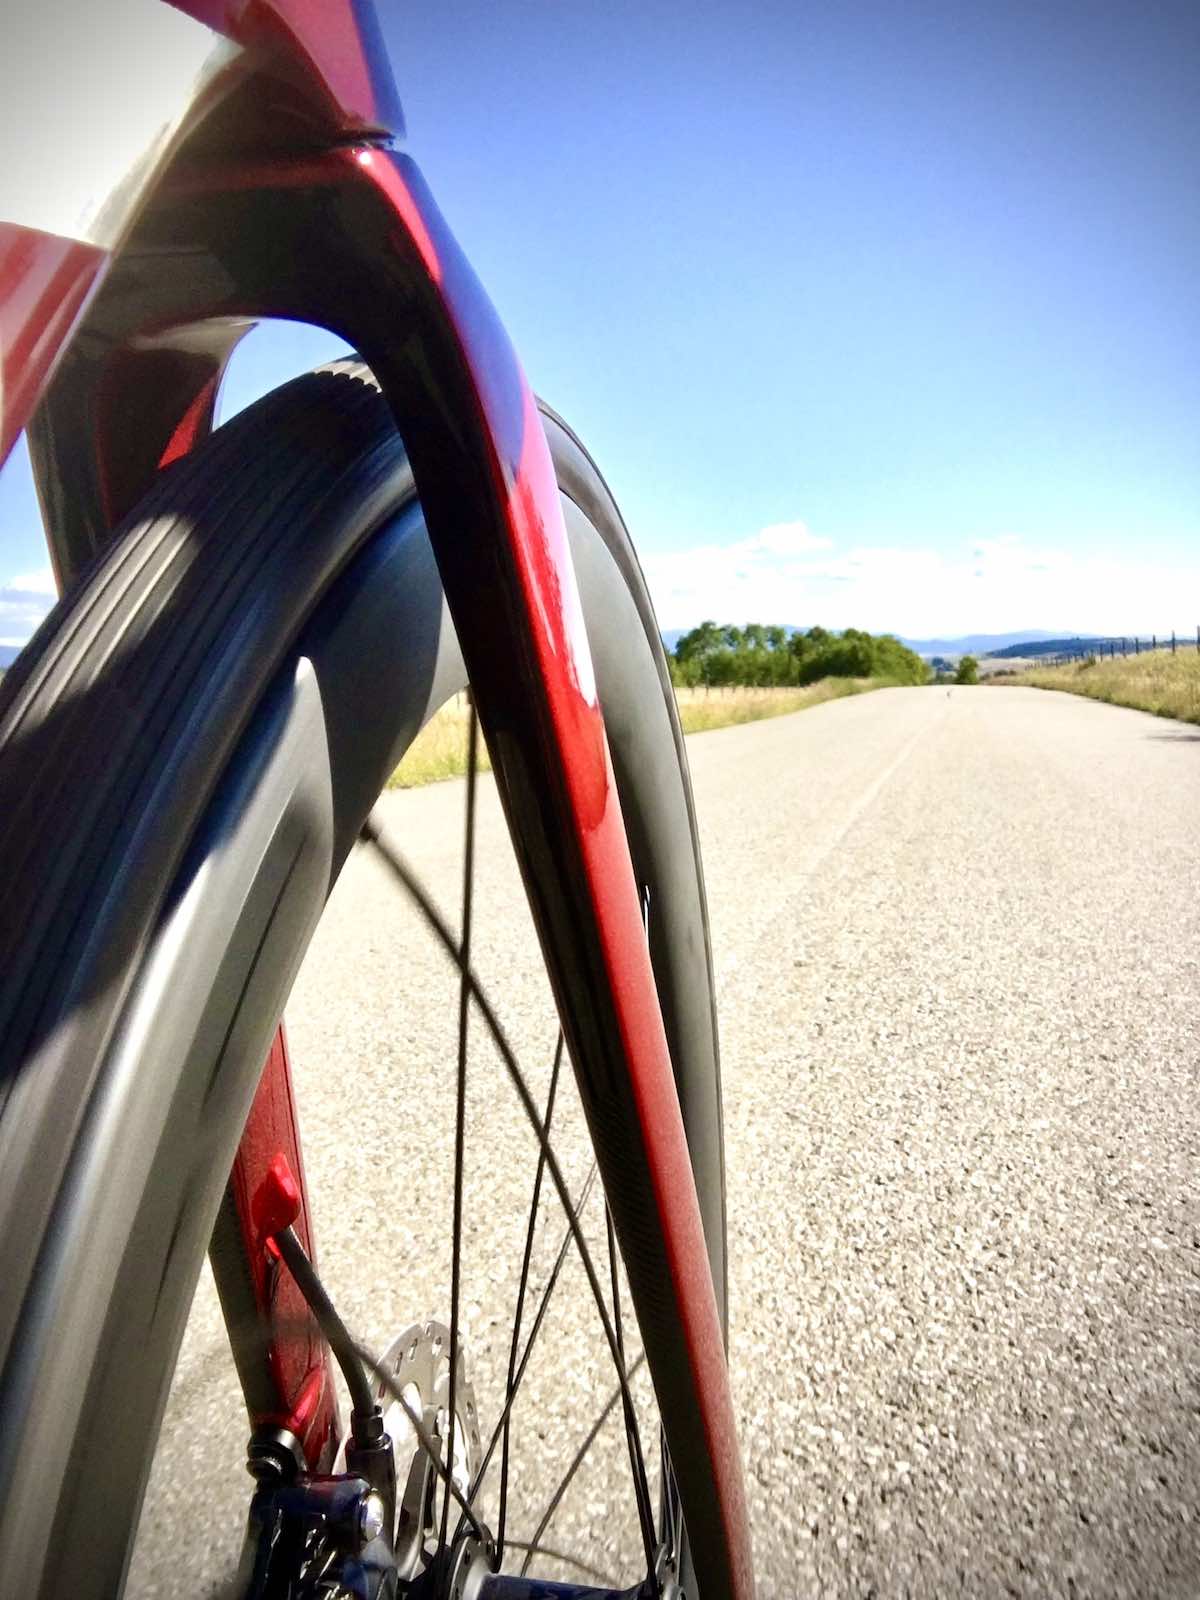 bikerumor pic of the day the photo is from the side of a road bike looking forward past the front wheel and fork towards the long straight road, the sky is clear and the sun is bright.